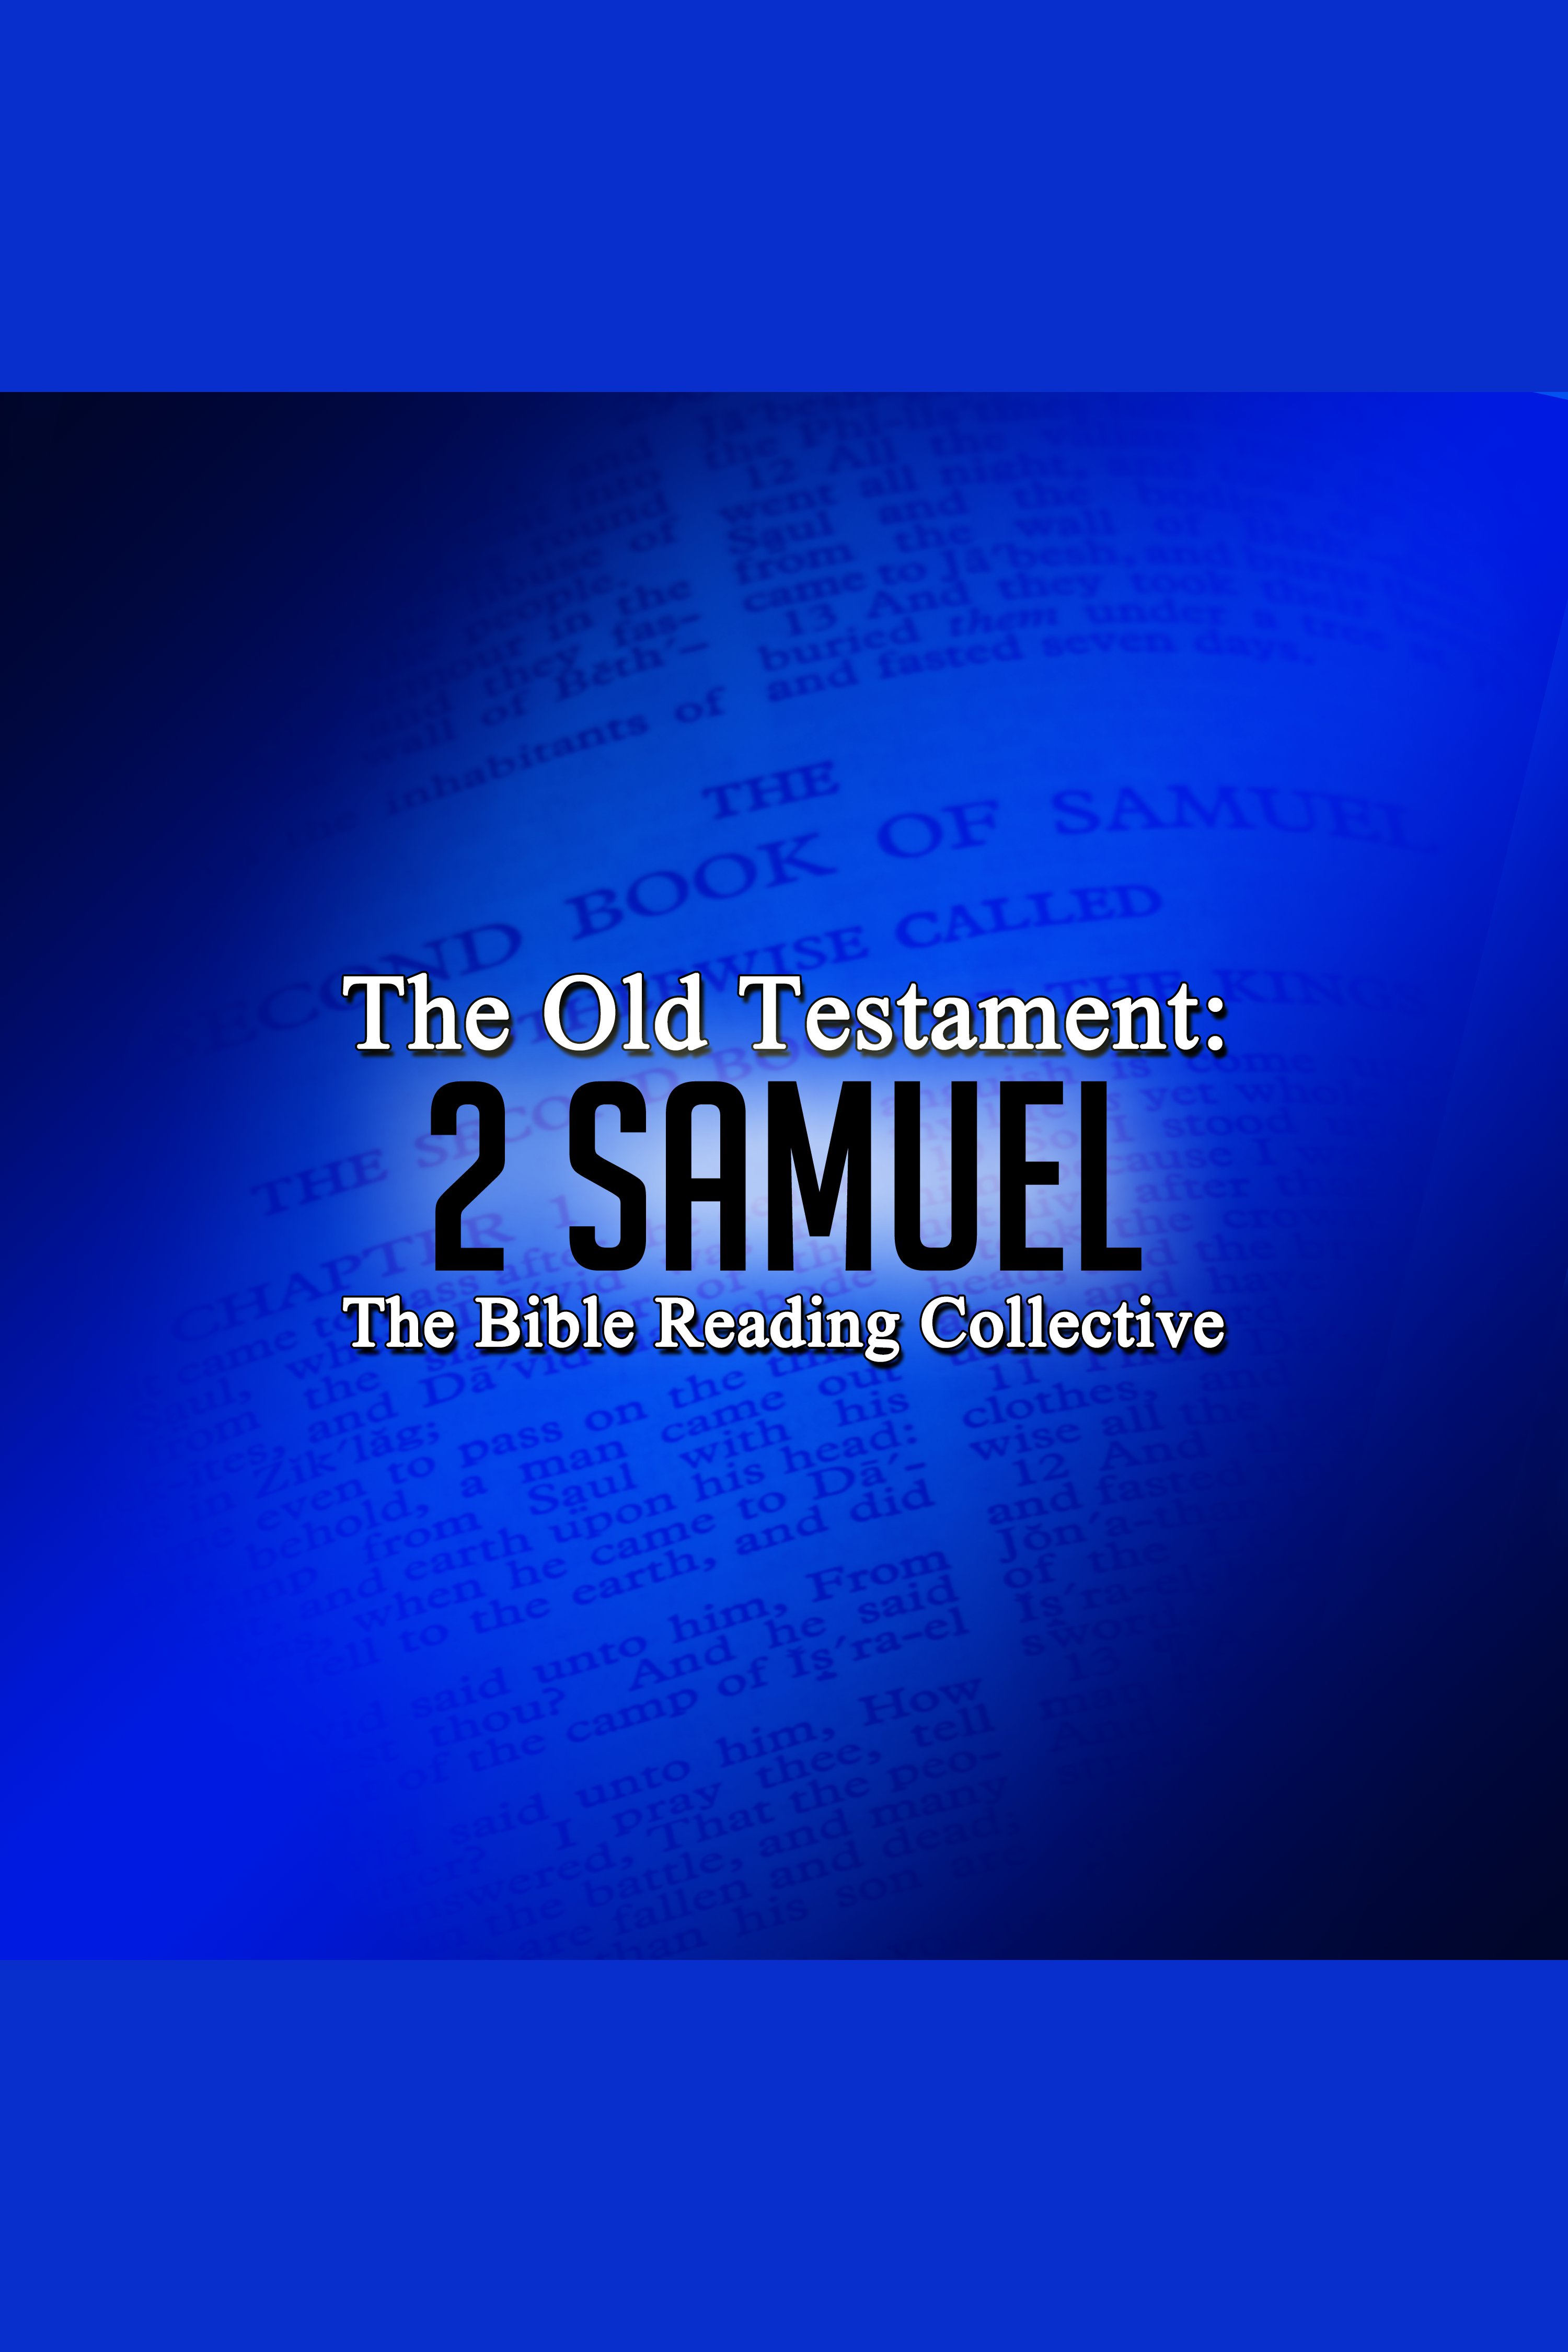 The Old Testament: 2 Samuel cover image